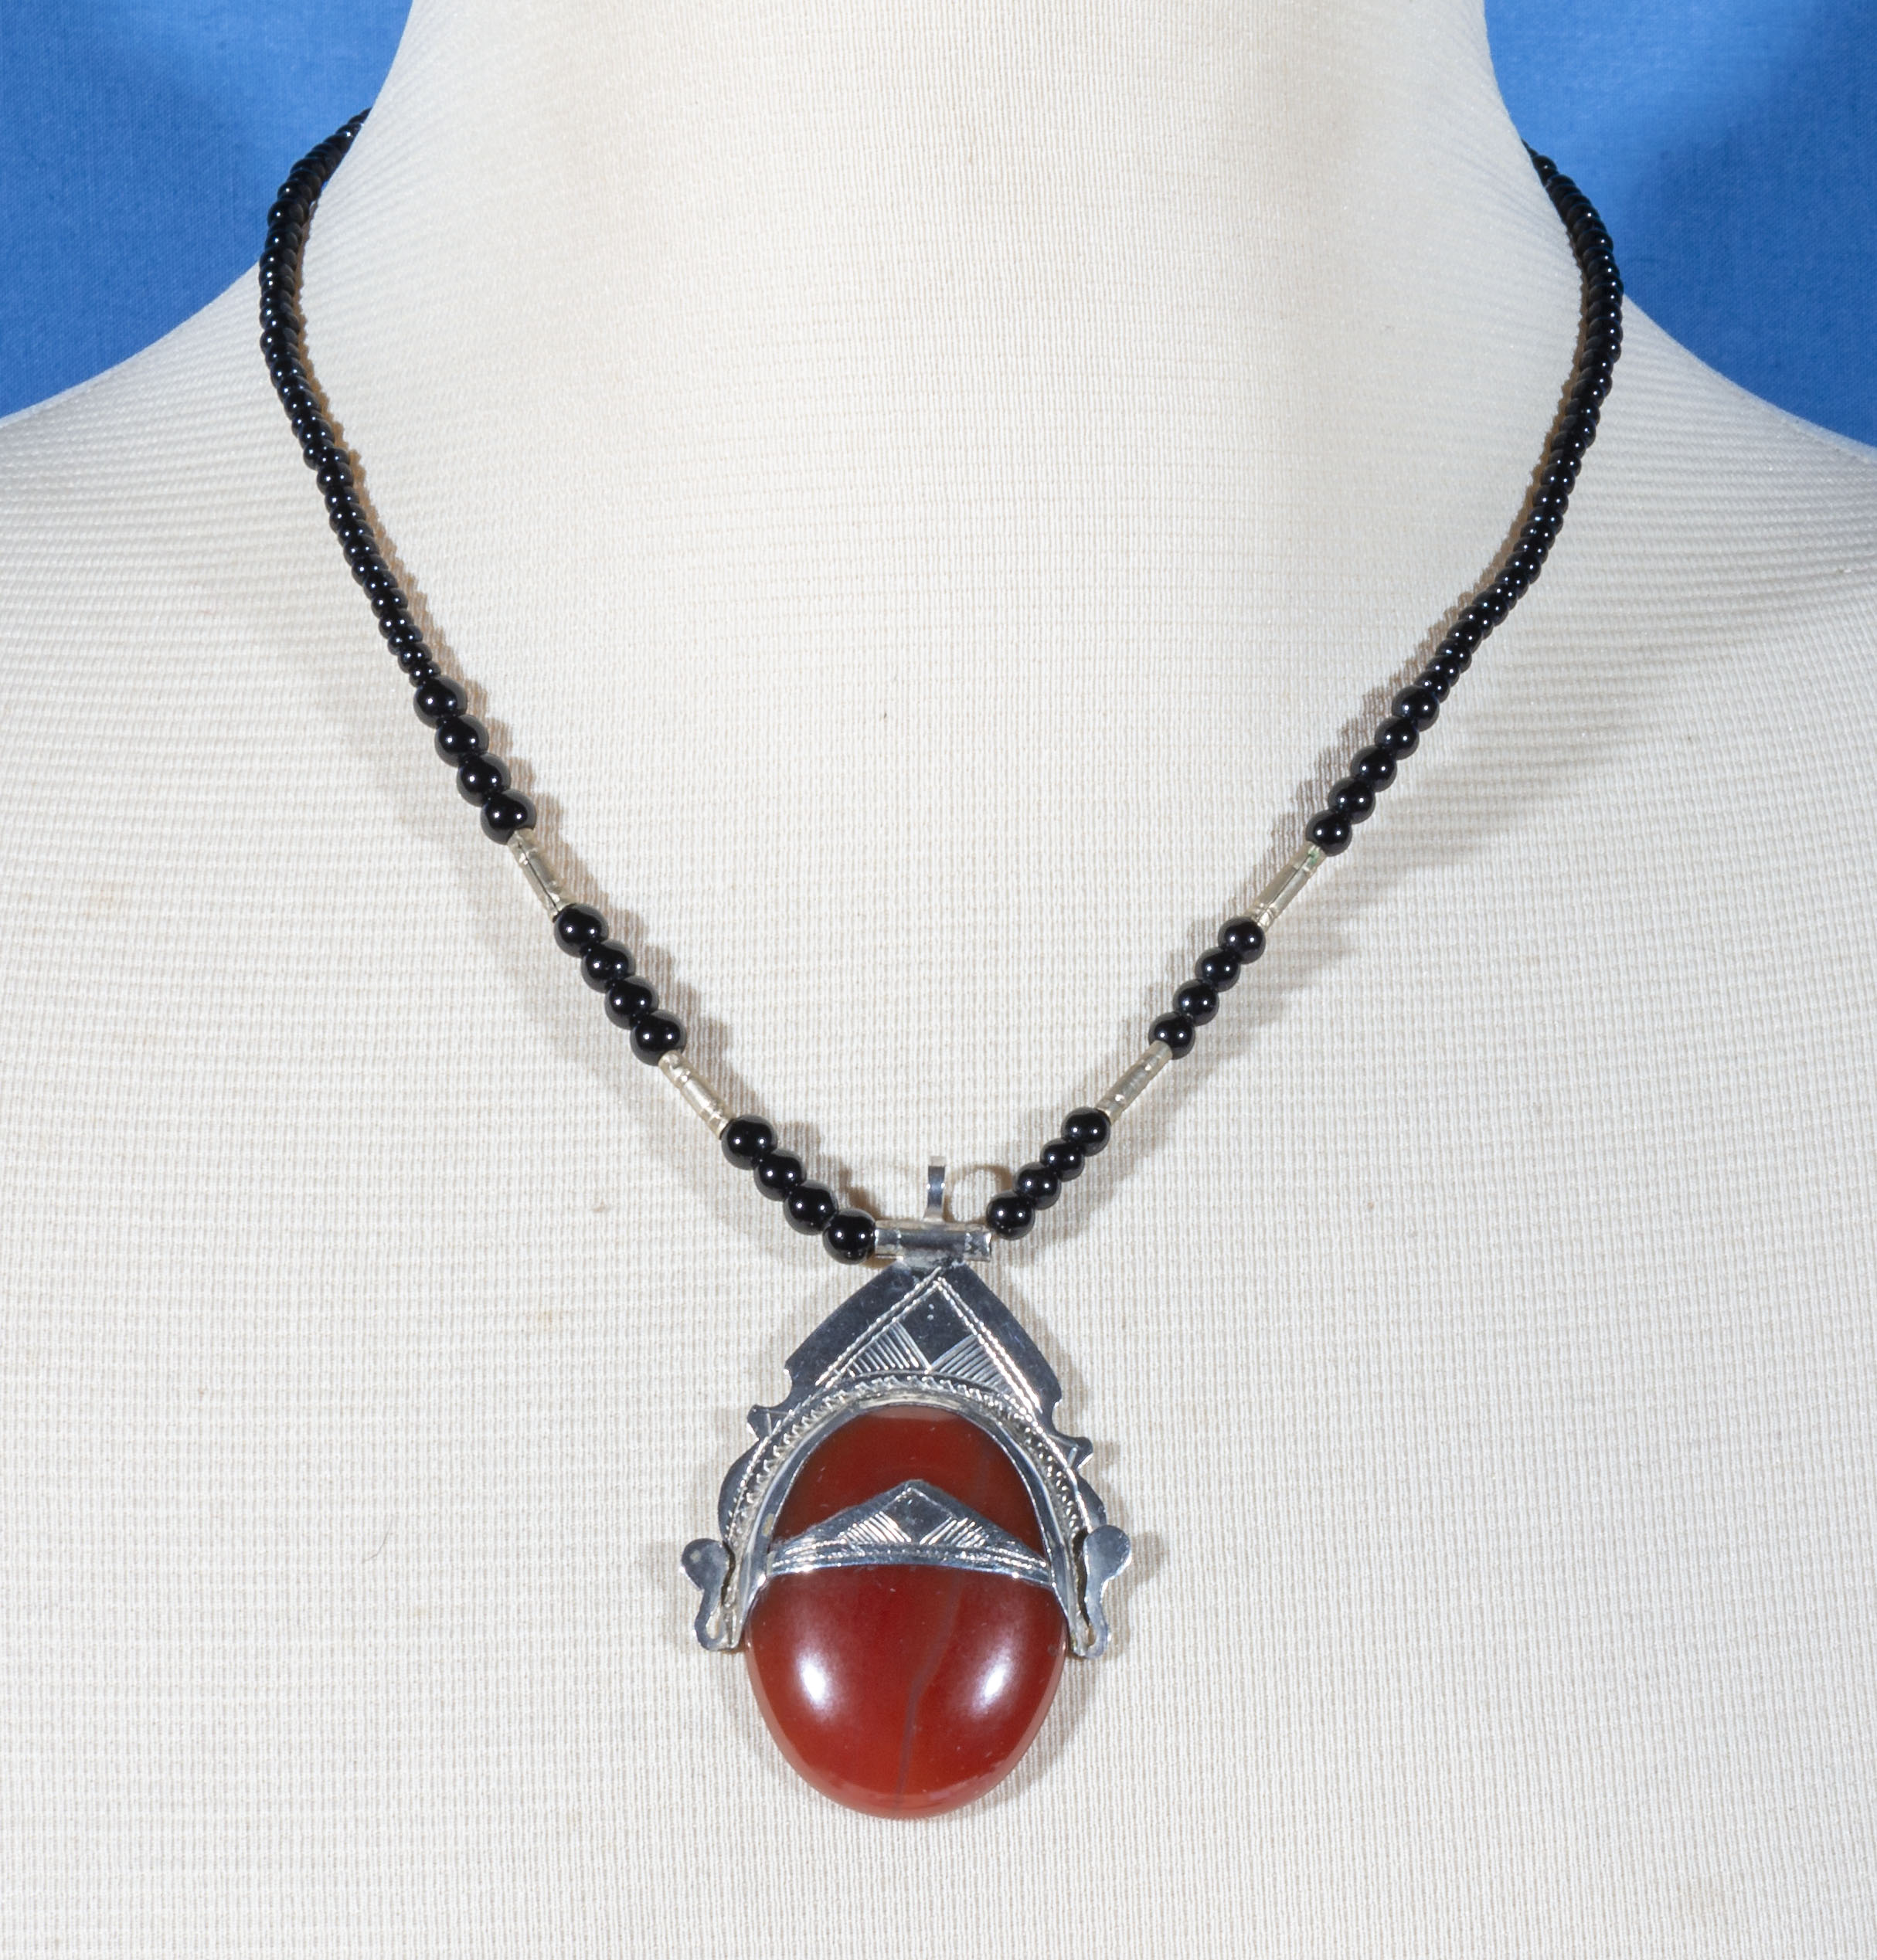 Vintage Tuareg necklace with silver and large Carnealian from Mali/Niger